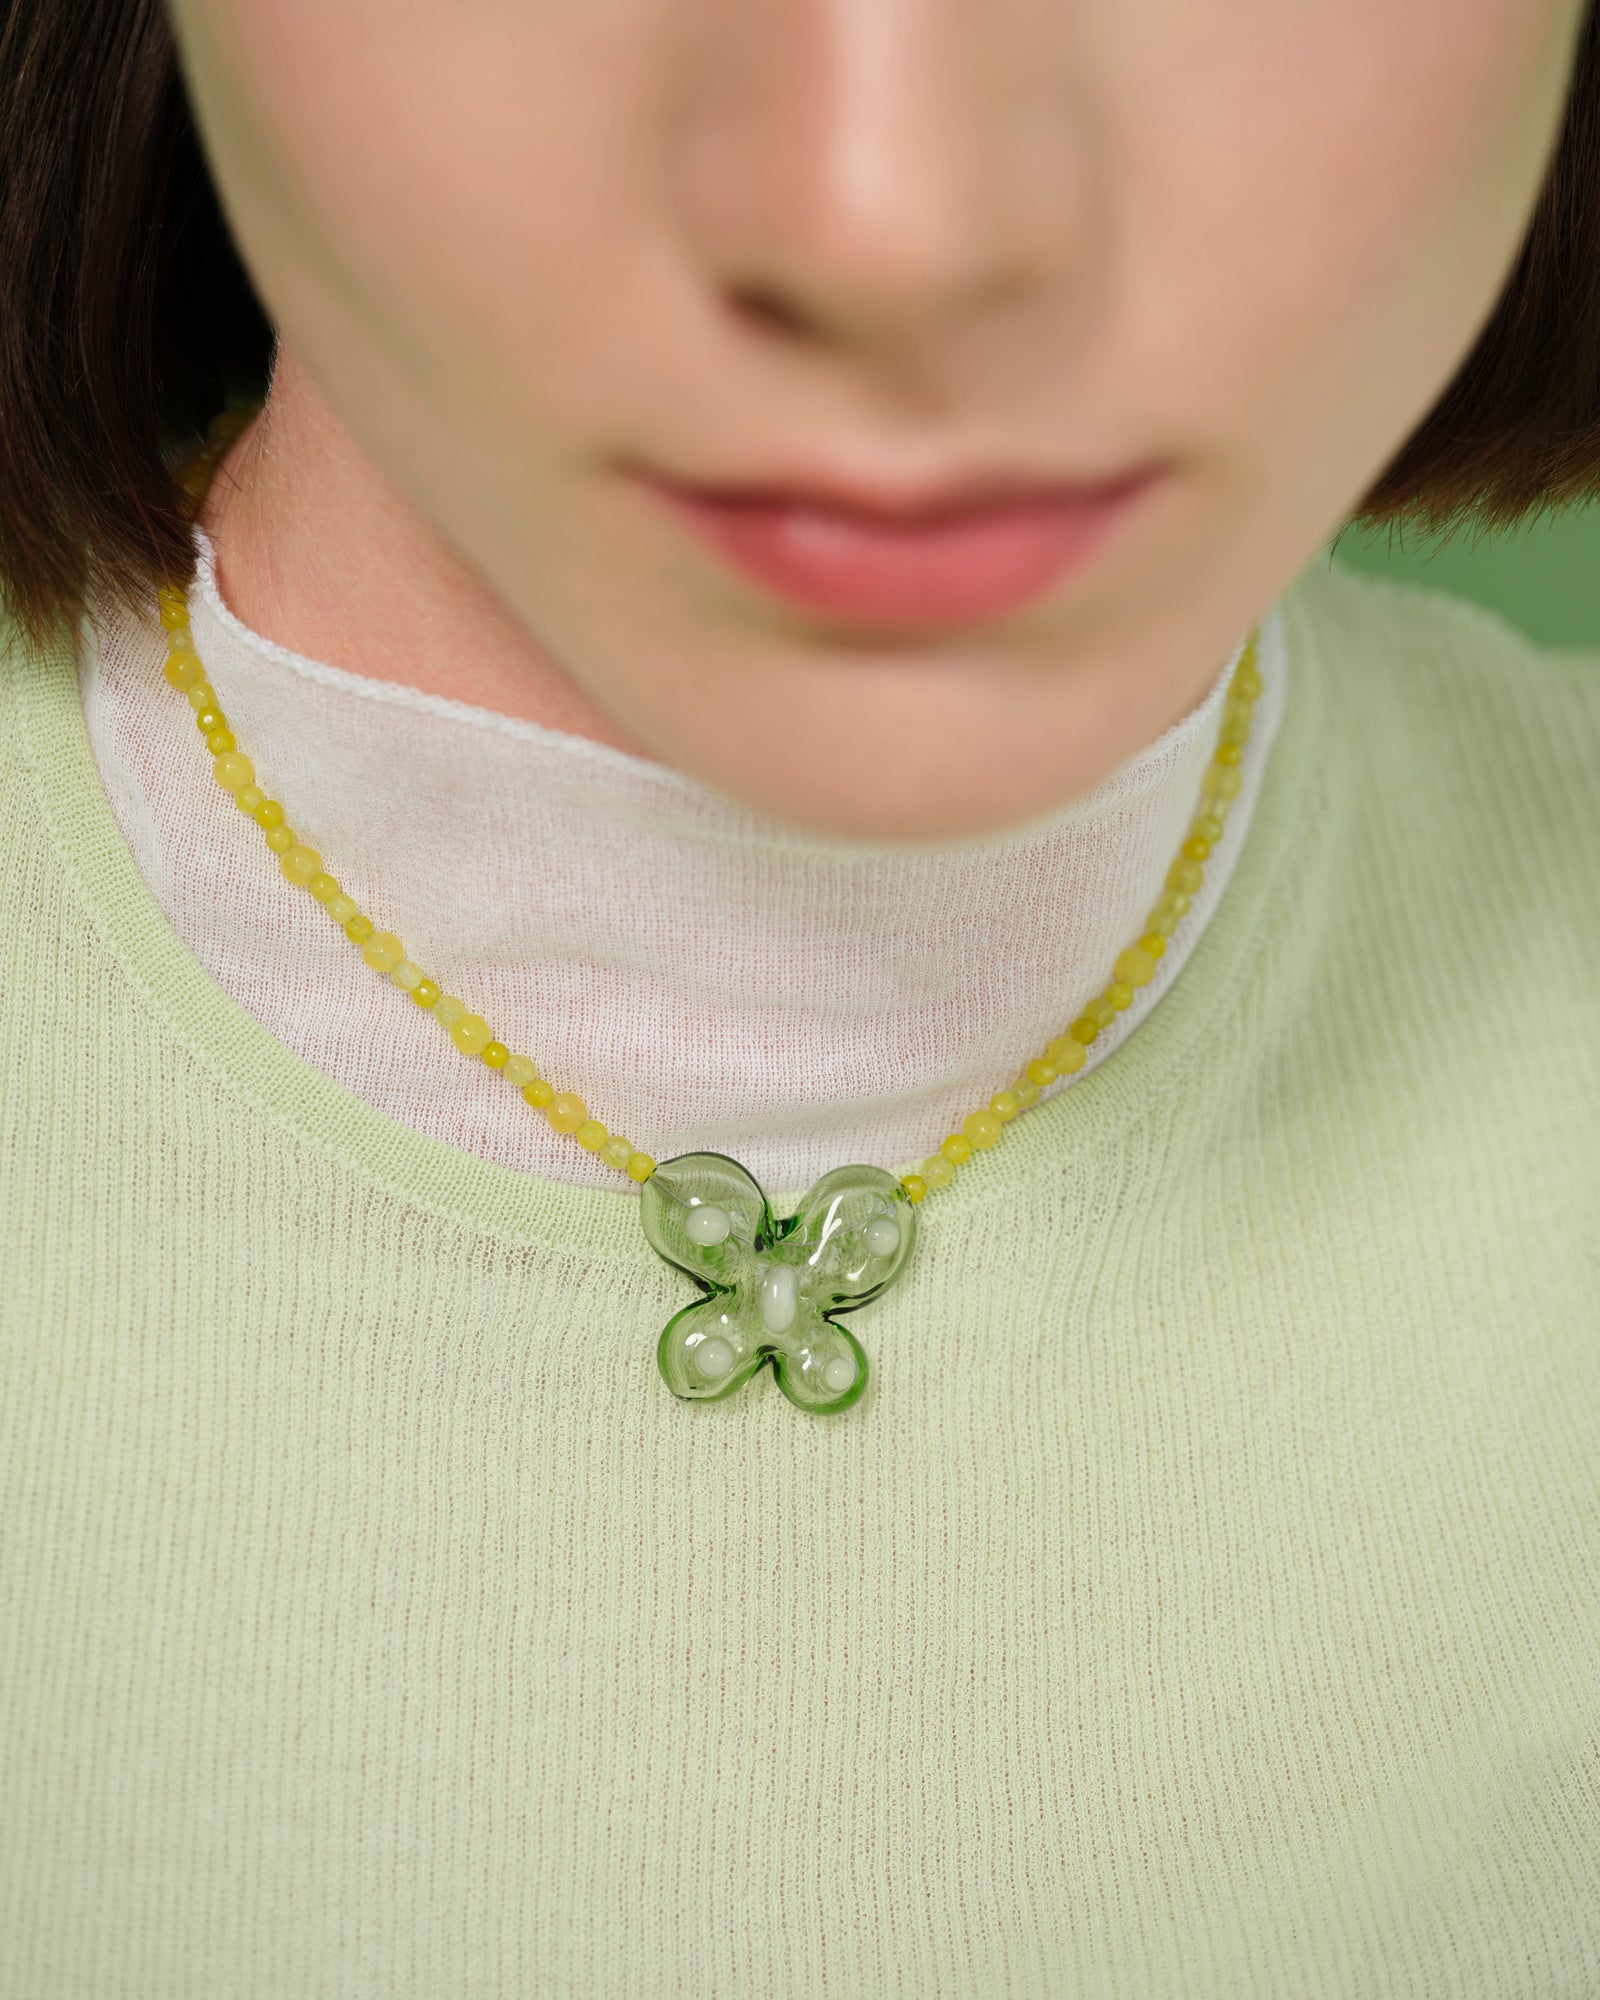 Pupa necklace